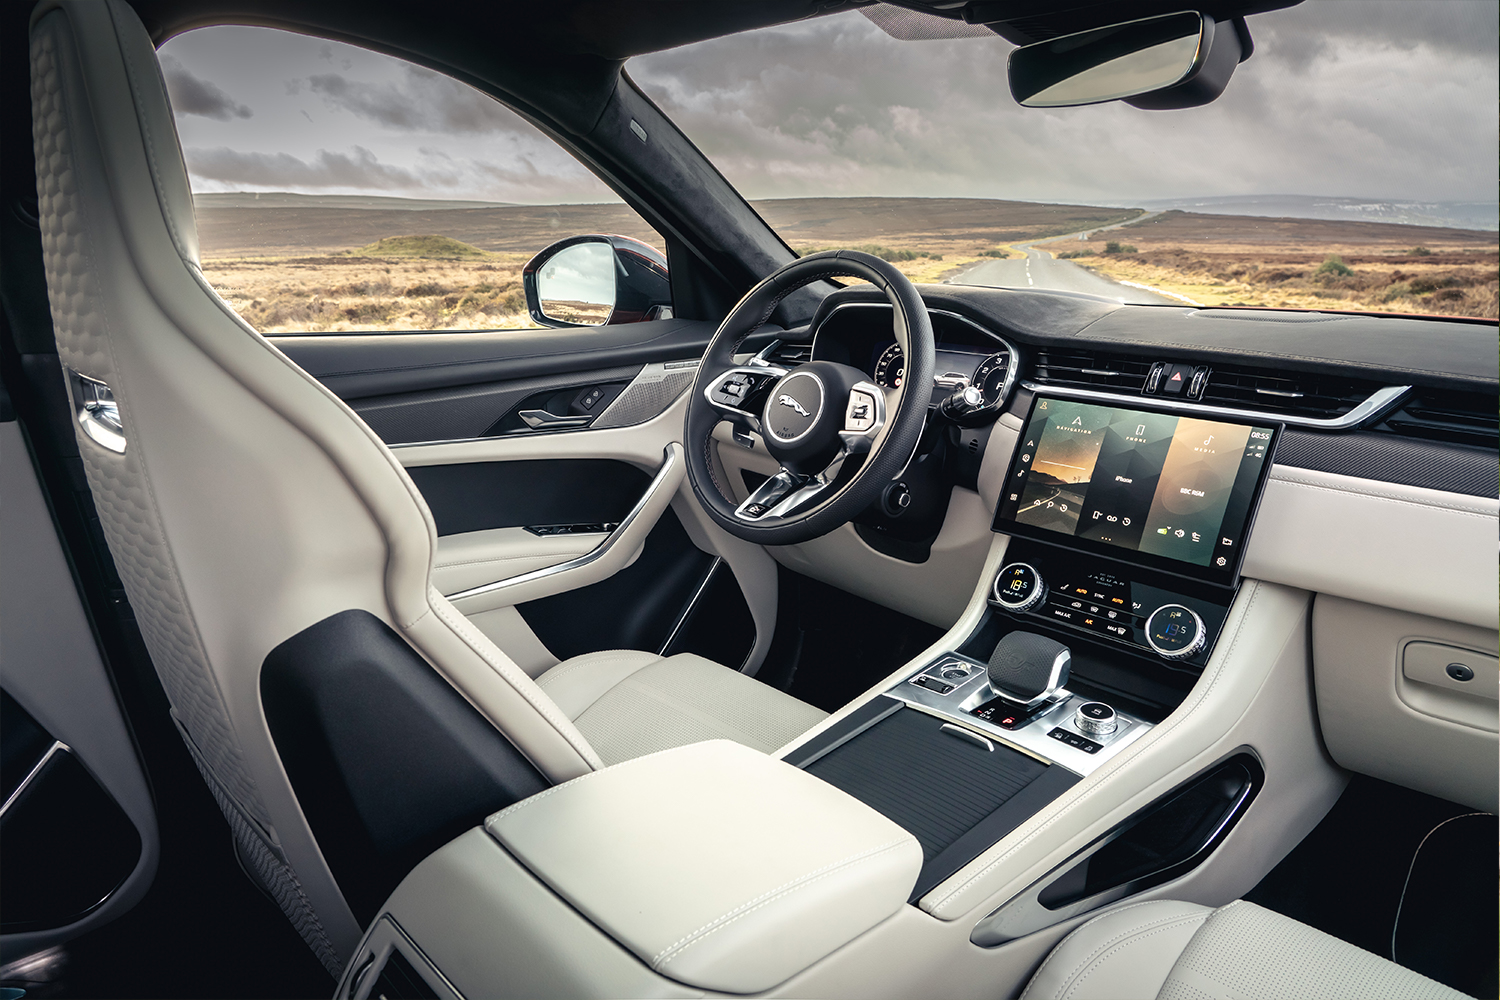 The front seats and dashboard inside the new Jaguar F-Pace SVR SUV, which features a refreshed infotainment screen